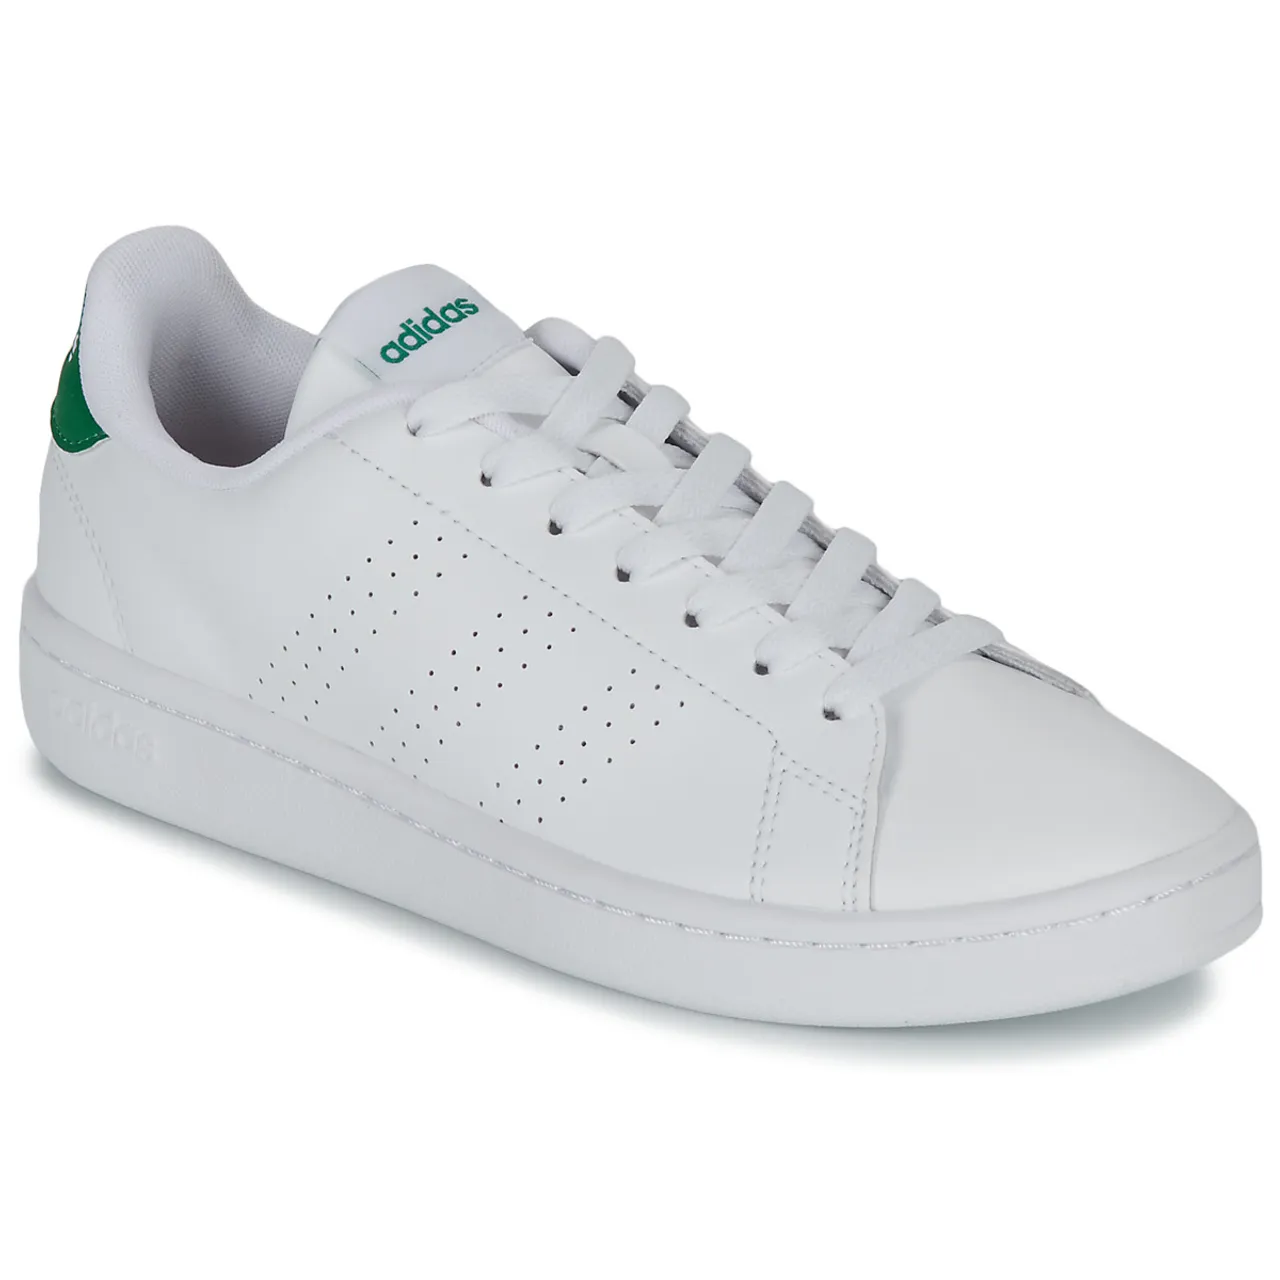 adidas  ADVANTAGE  women's Shoes (Trainers) in White